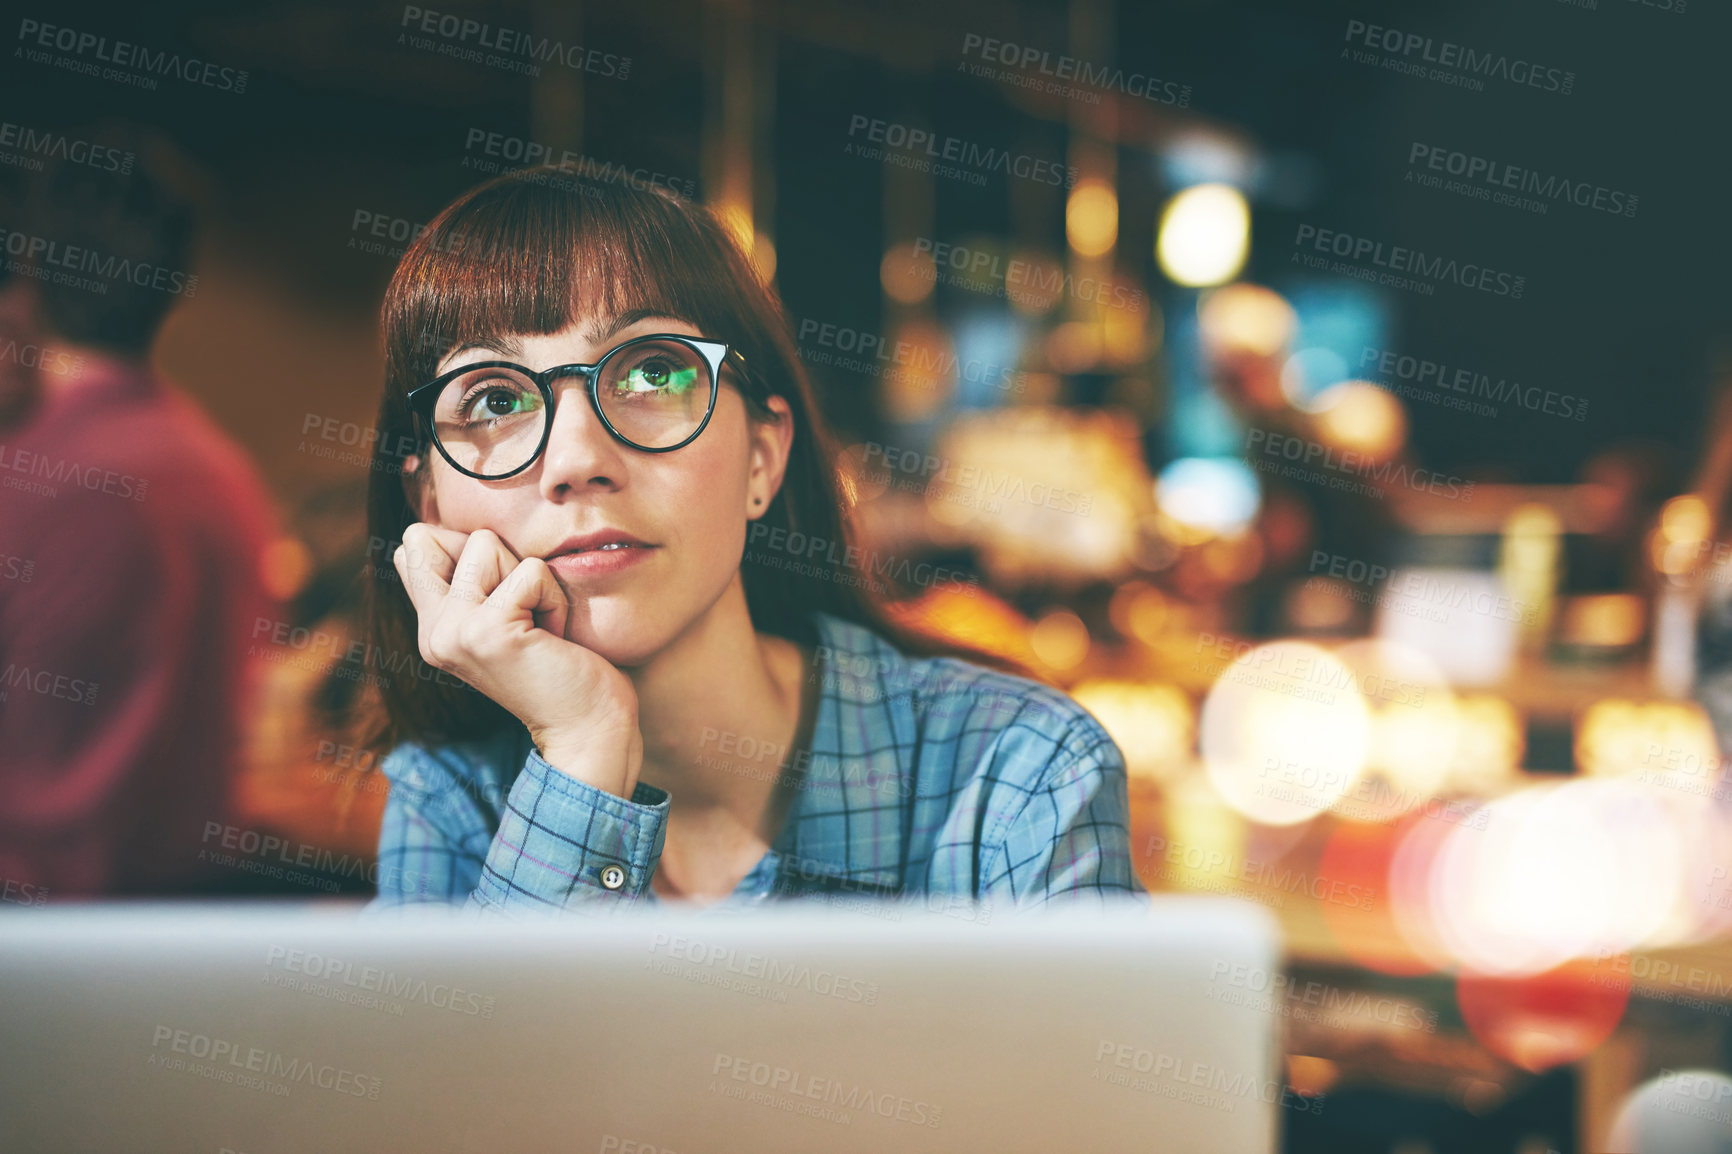 Buy stock photo Shot of an attractive young woman looking thoughtful while using her laptop in a cafe